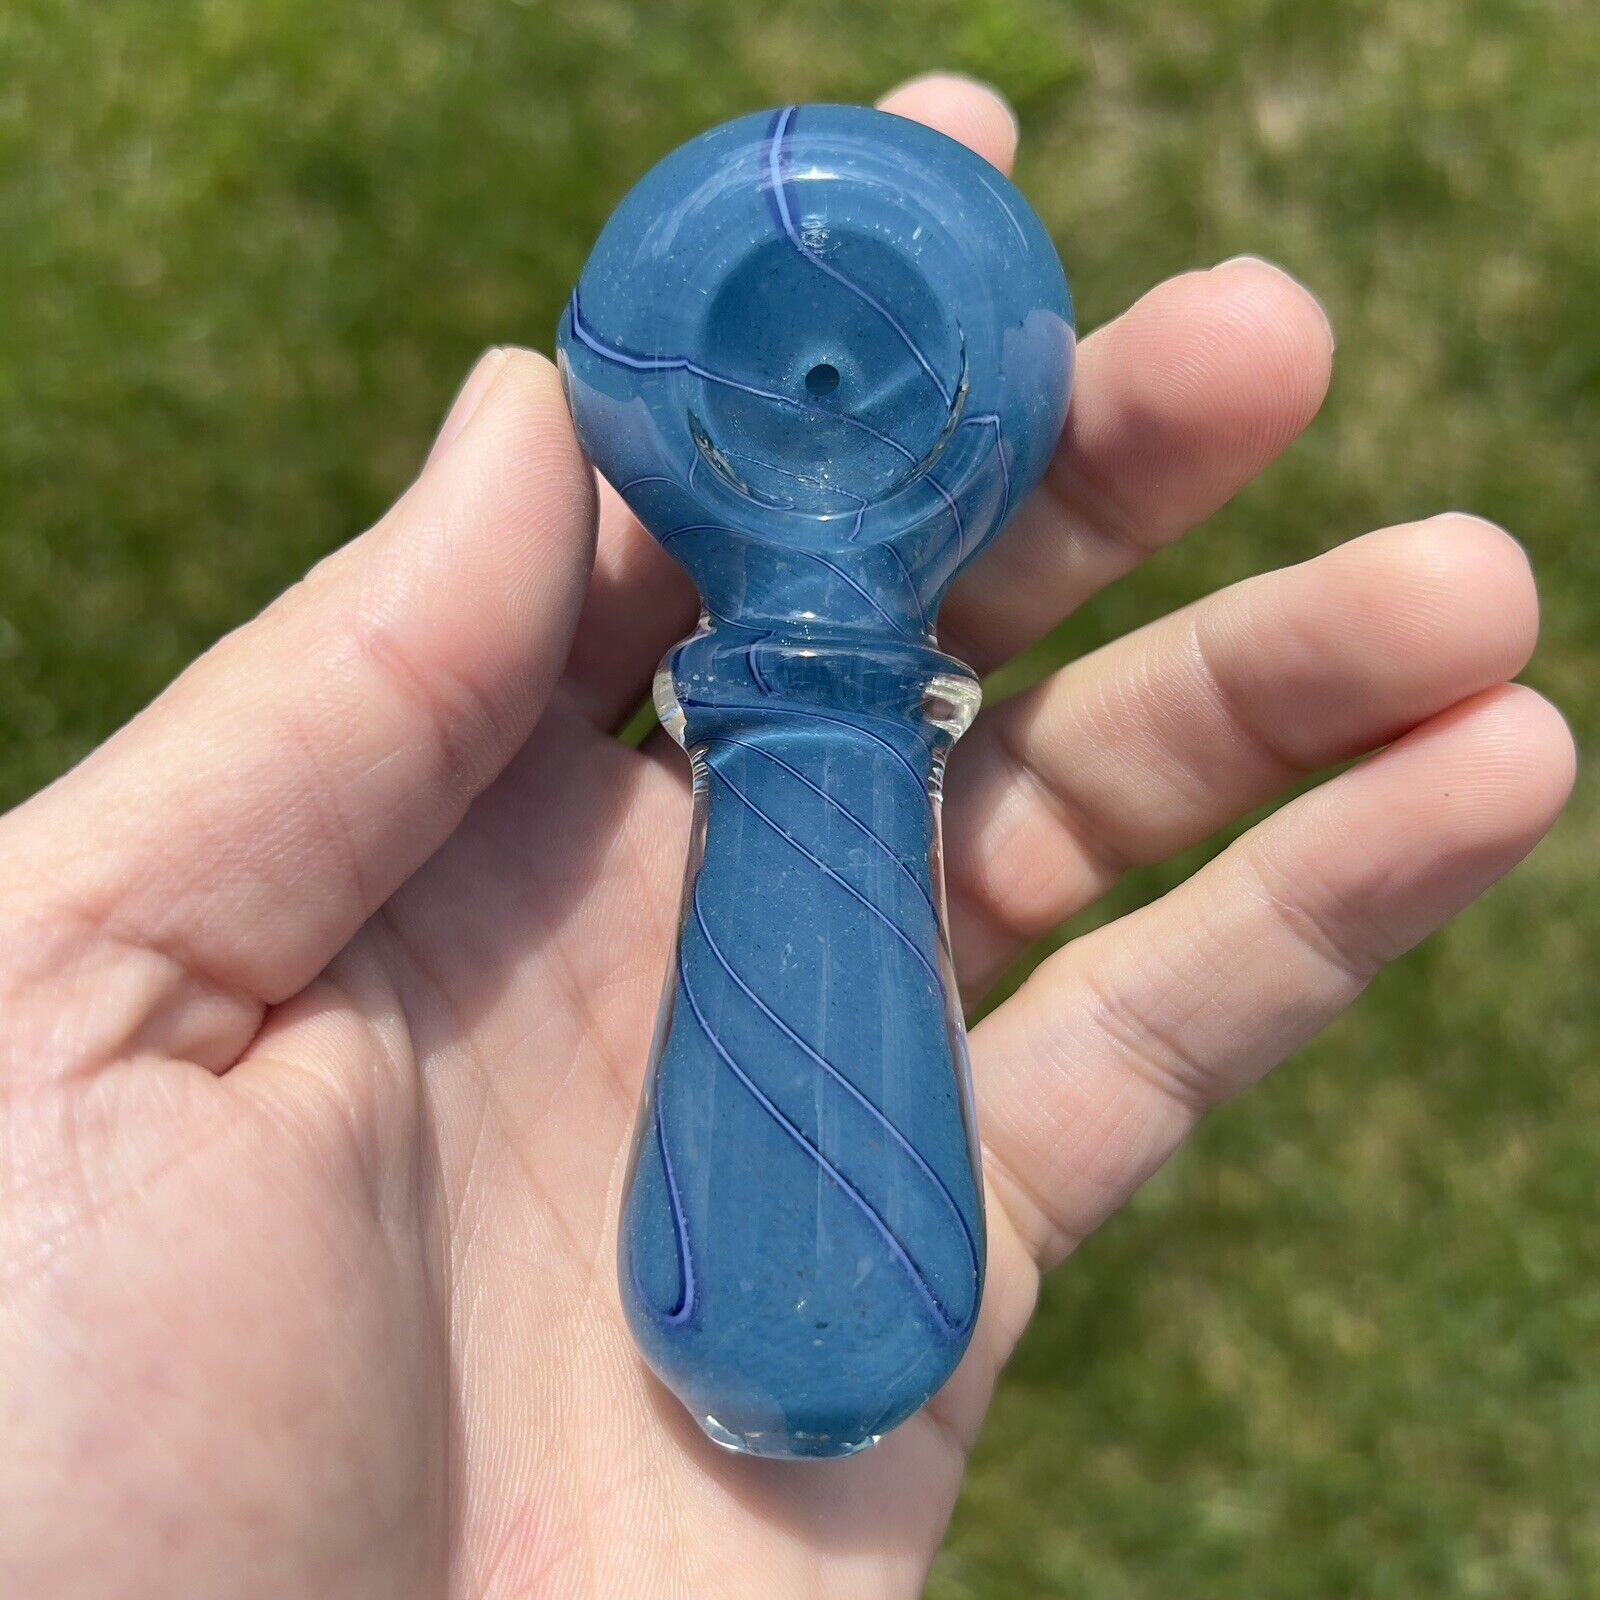 Small Blue Tobacco Smoking Glass Spoon hand Pipe Bowl Collectible Pipes - 4.3